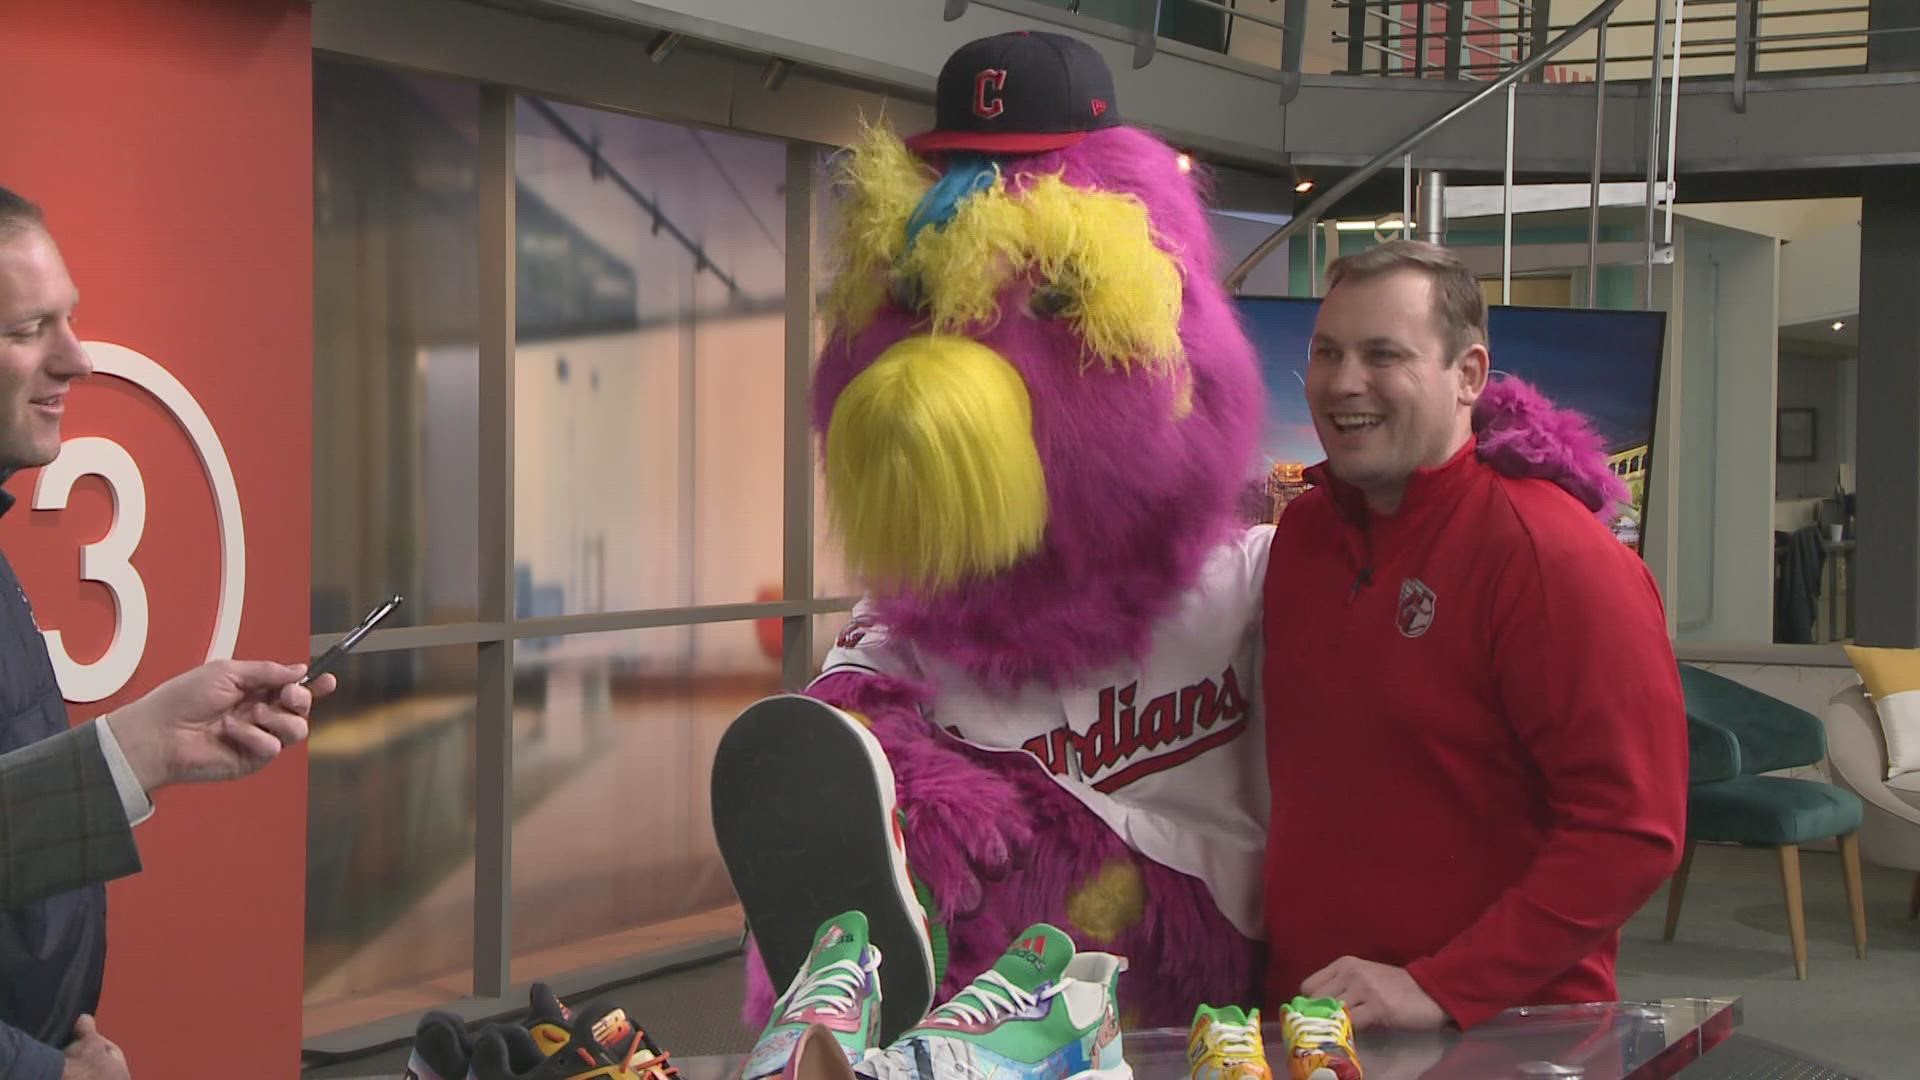 The Cleveland Guardians visited 3News to discuss the new renovations at Progressive Field and what fans can expect at Guards Fest